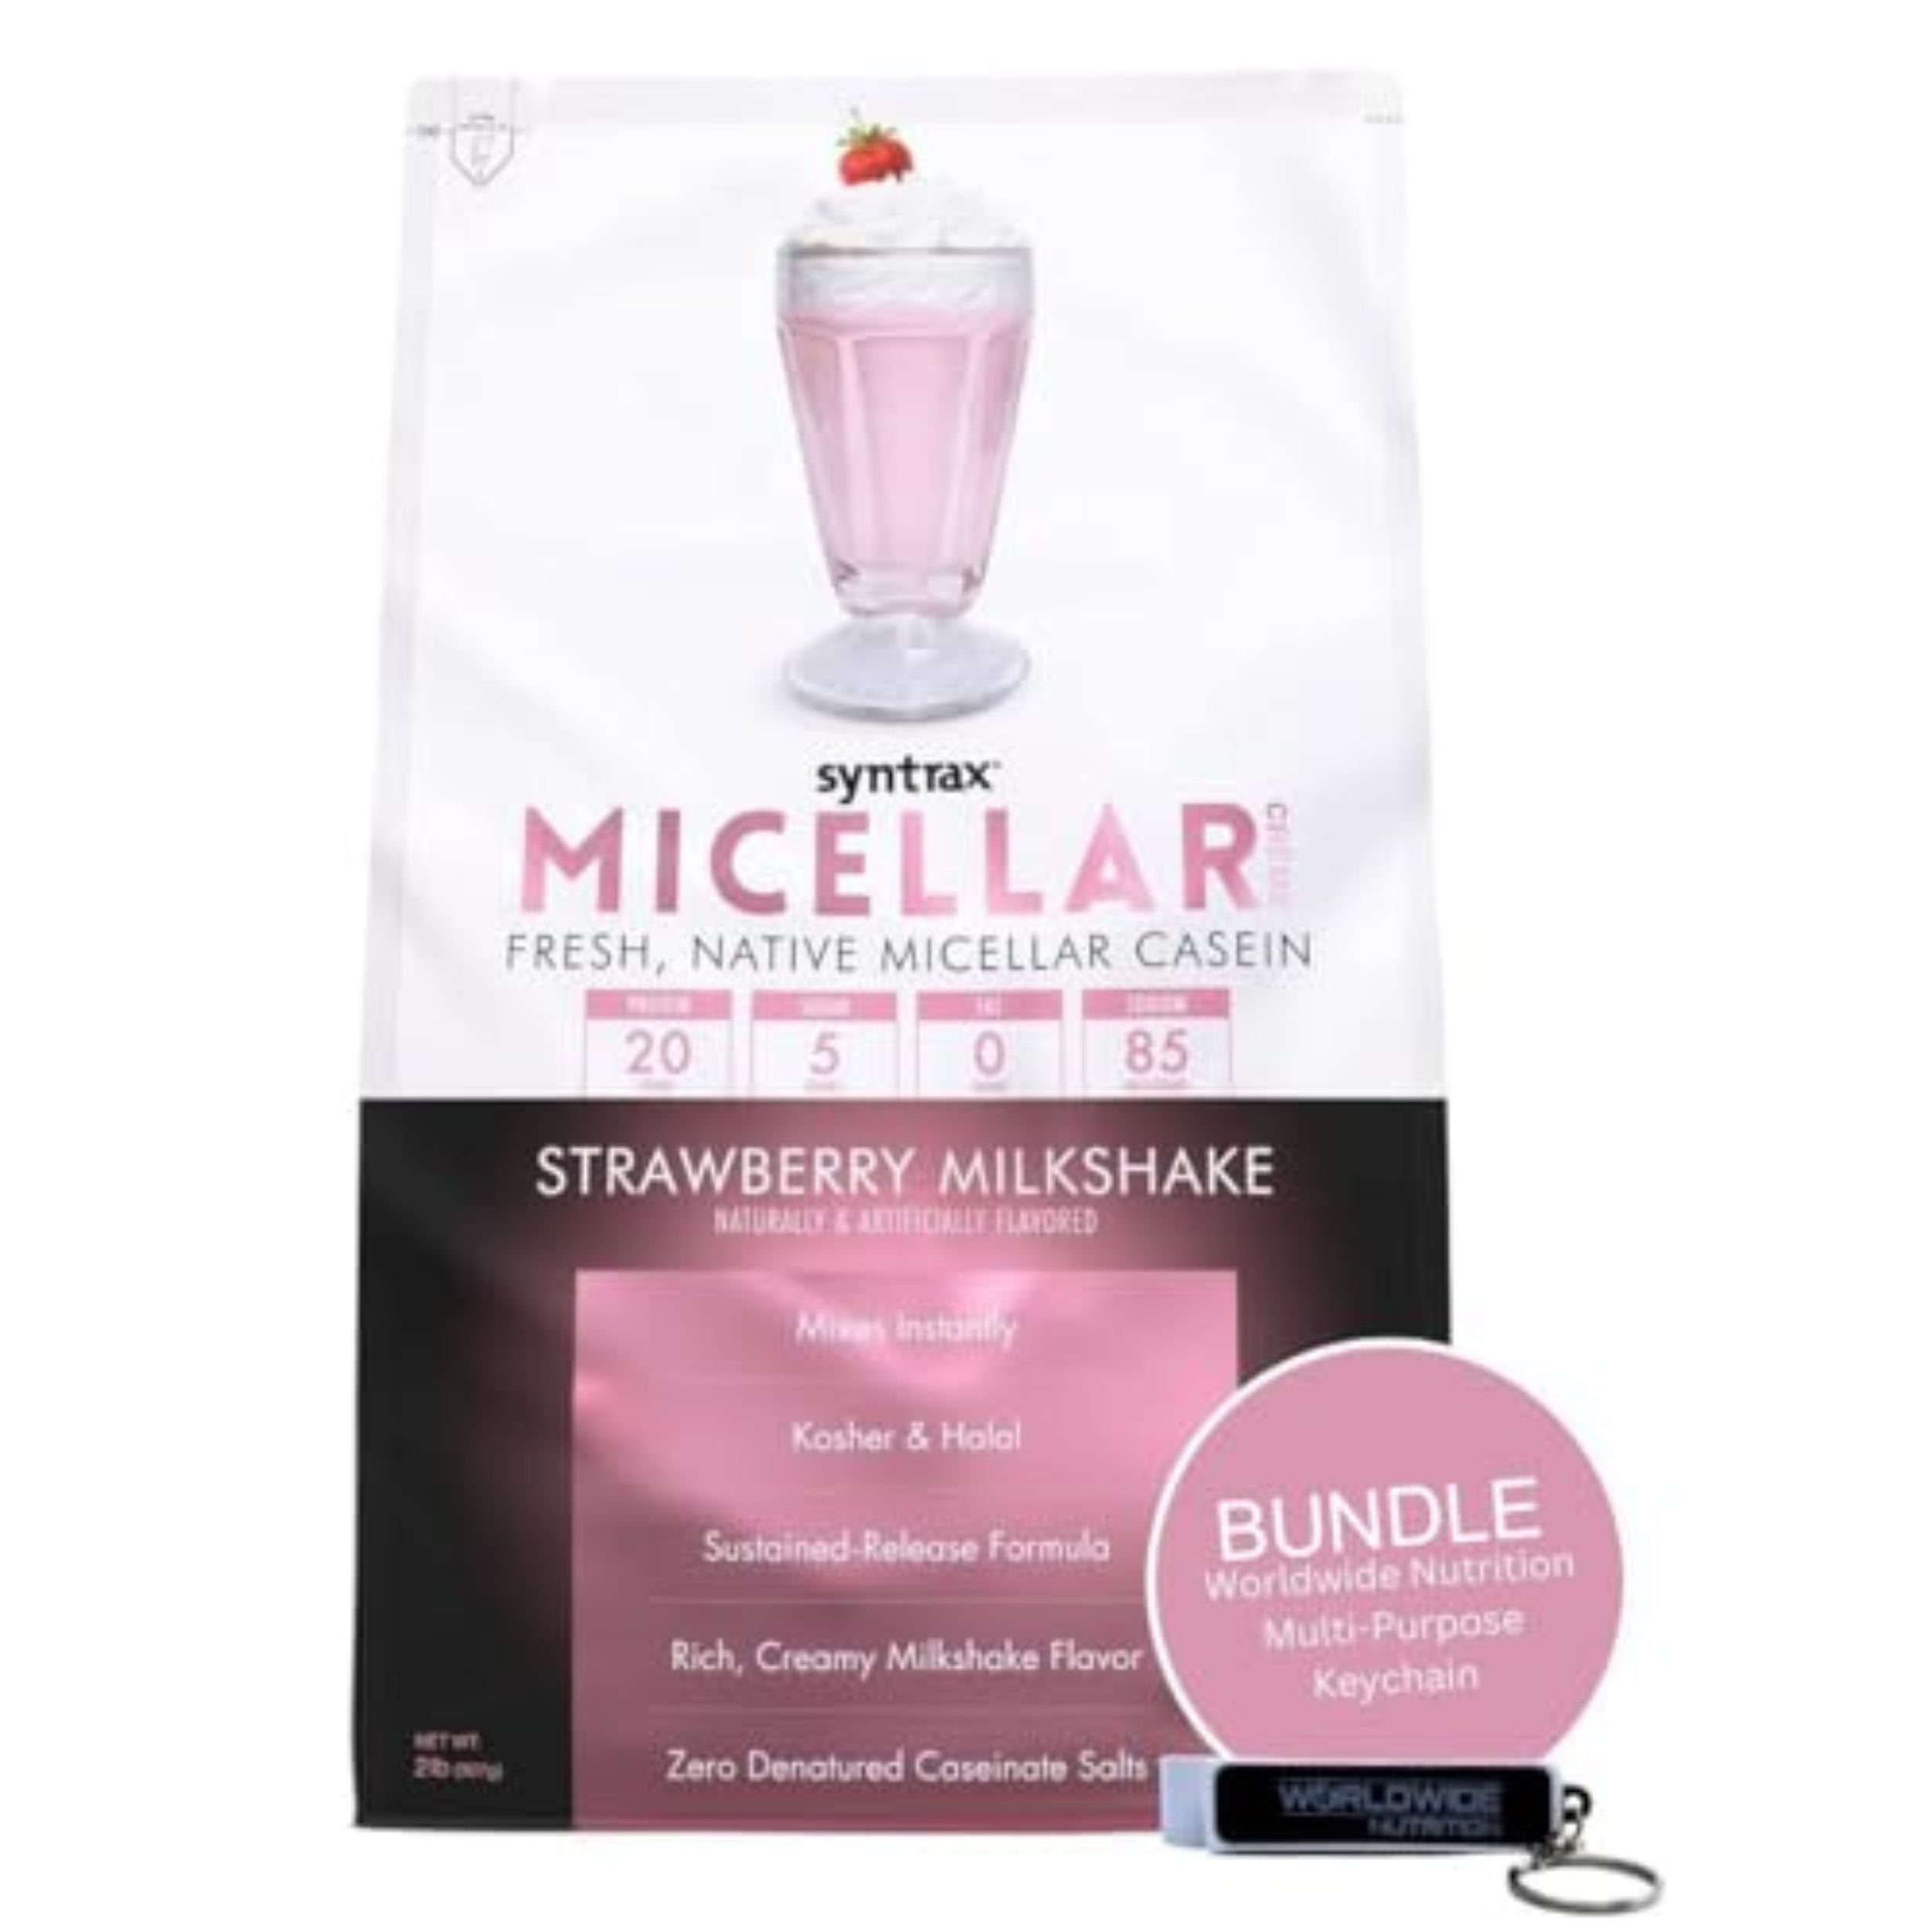 Syntrax Bundle, 2 Items: Micellar Créme Protein Powder - 2lbs of Kosher and Halal Casein Protein Powder, an Instant Mix for a Creamy High Protein Powder and Worldwide Nutrition Keychain.